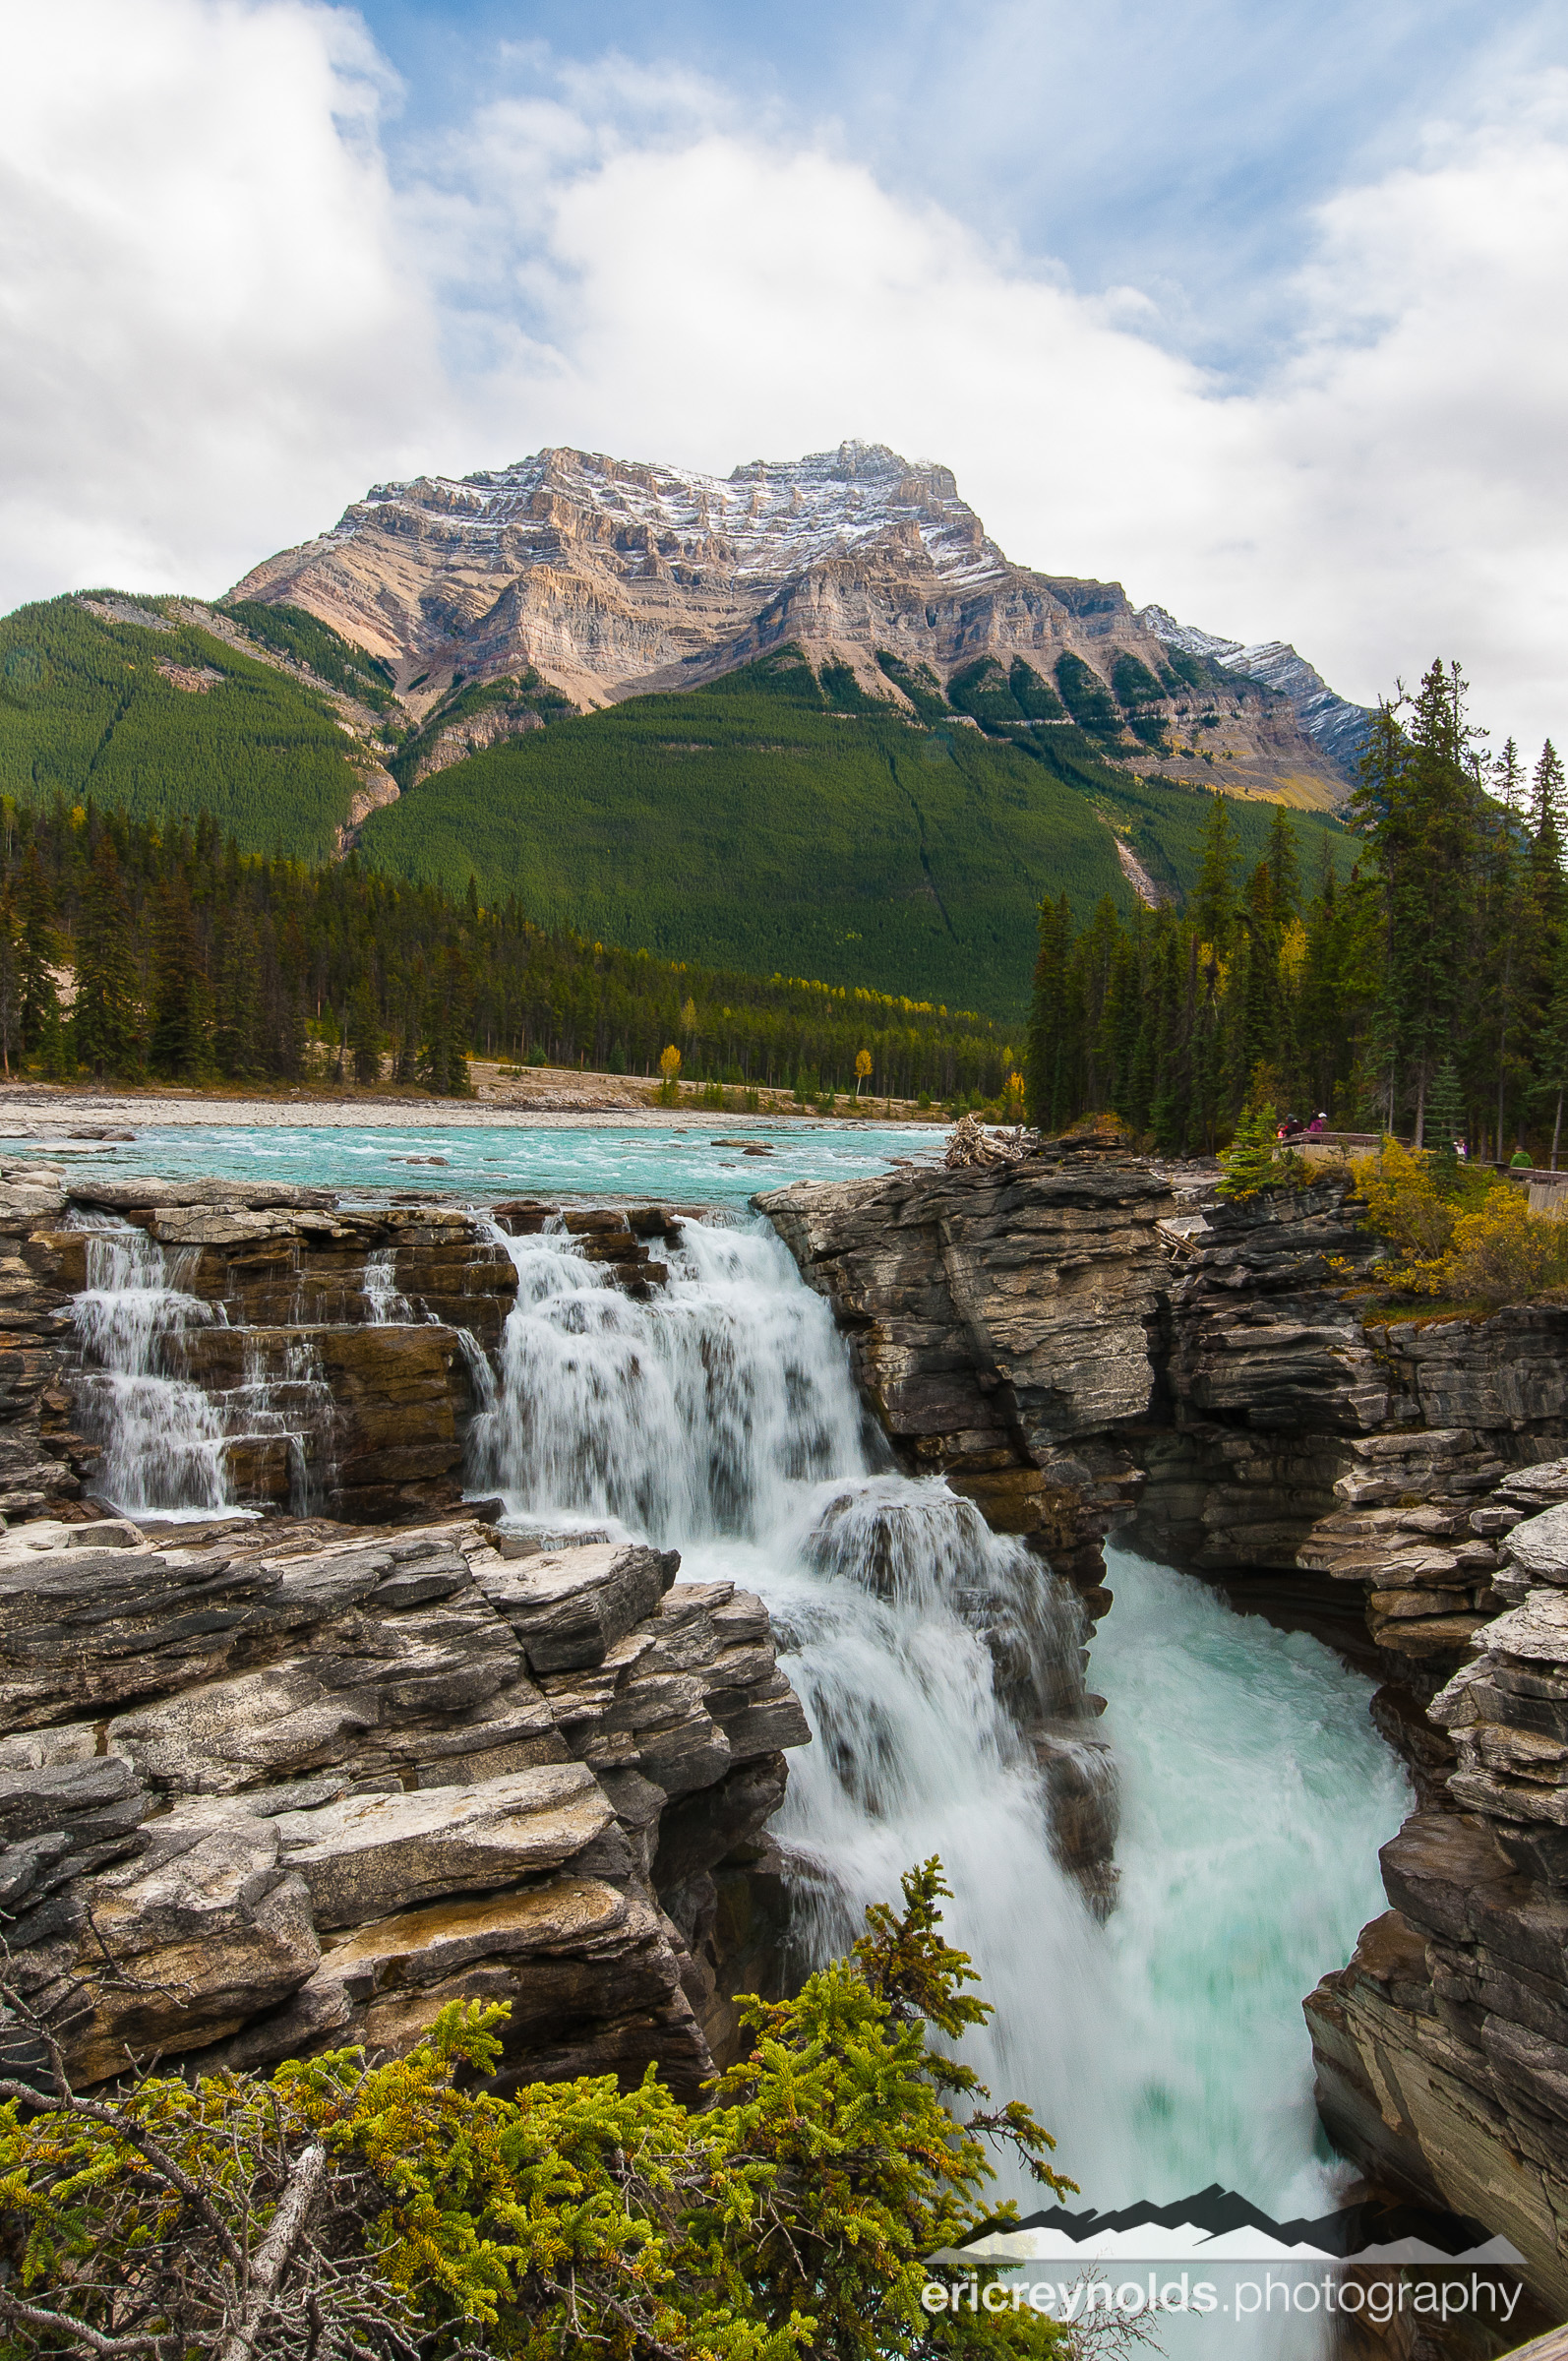 Mt. Athabasca & Athabasca Falls by Eric Reynolds - Landscape Photographer